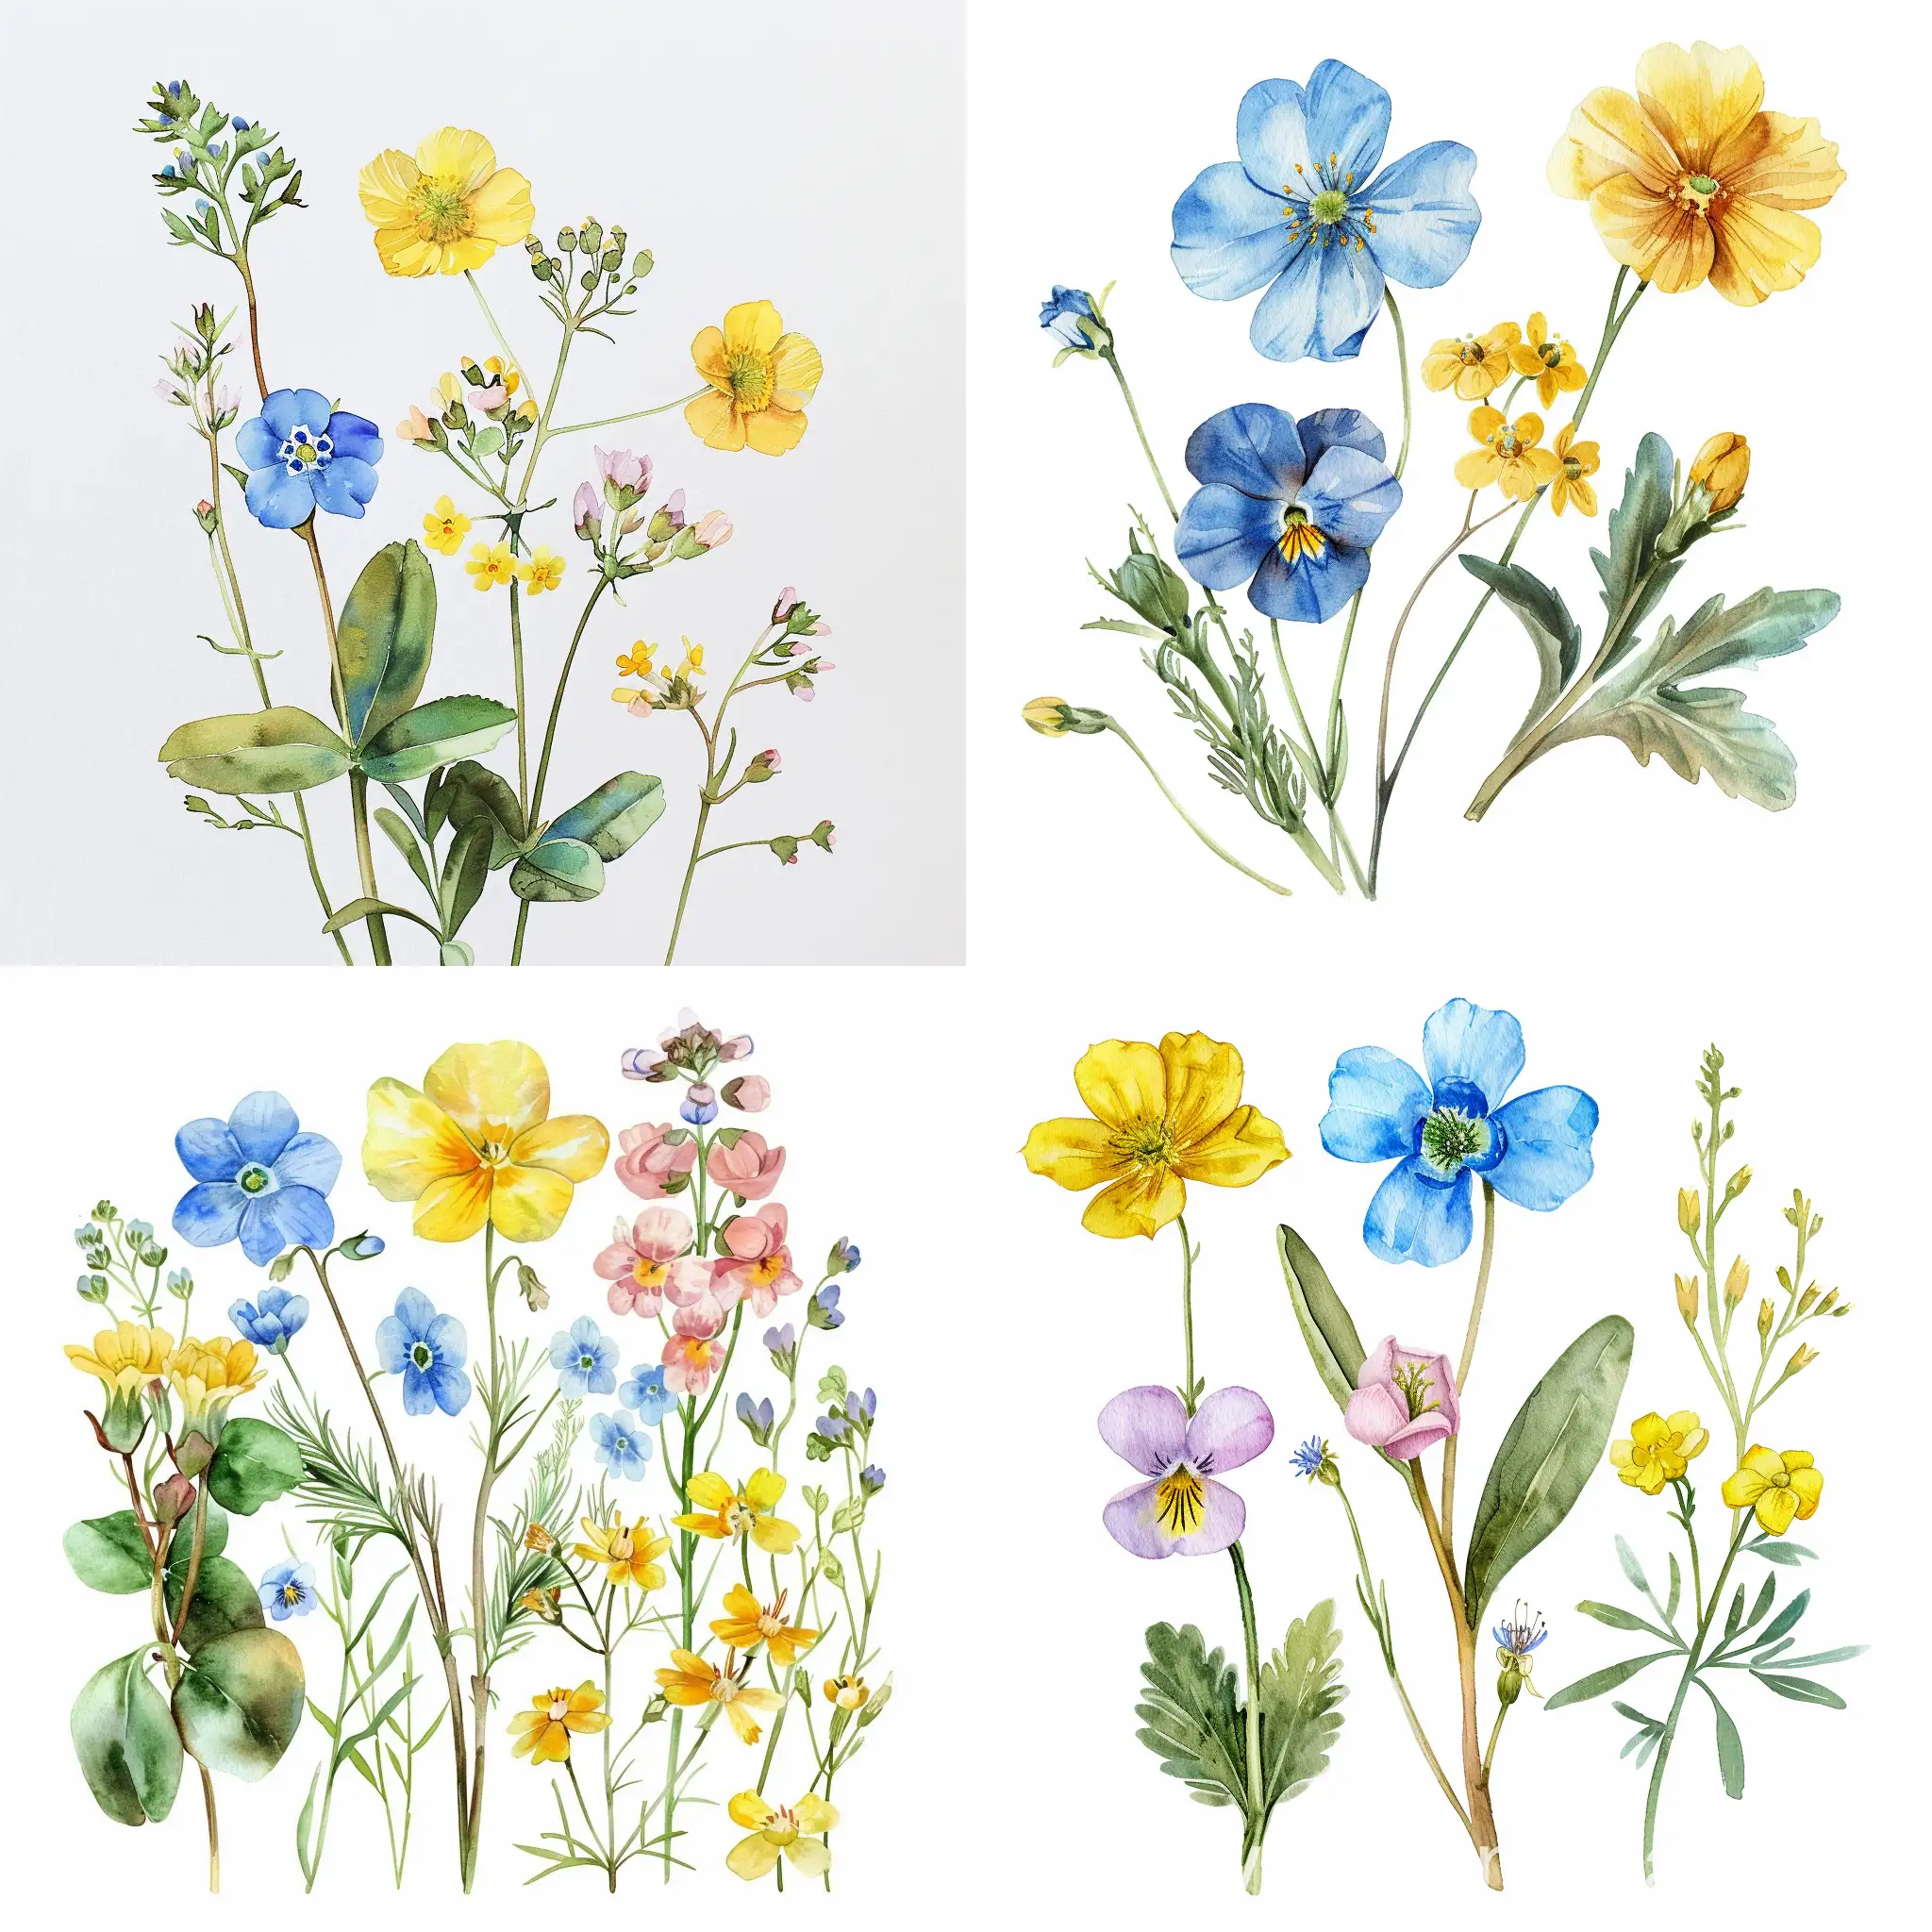 Botanical-Watercolor-Painting-Delicate-ForgetMeNots-Buttercups-and-Saxifrages-on-White-Background